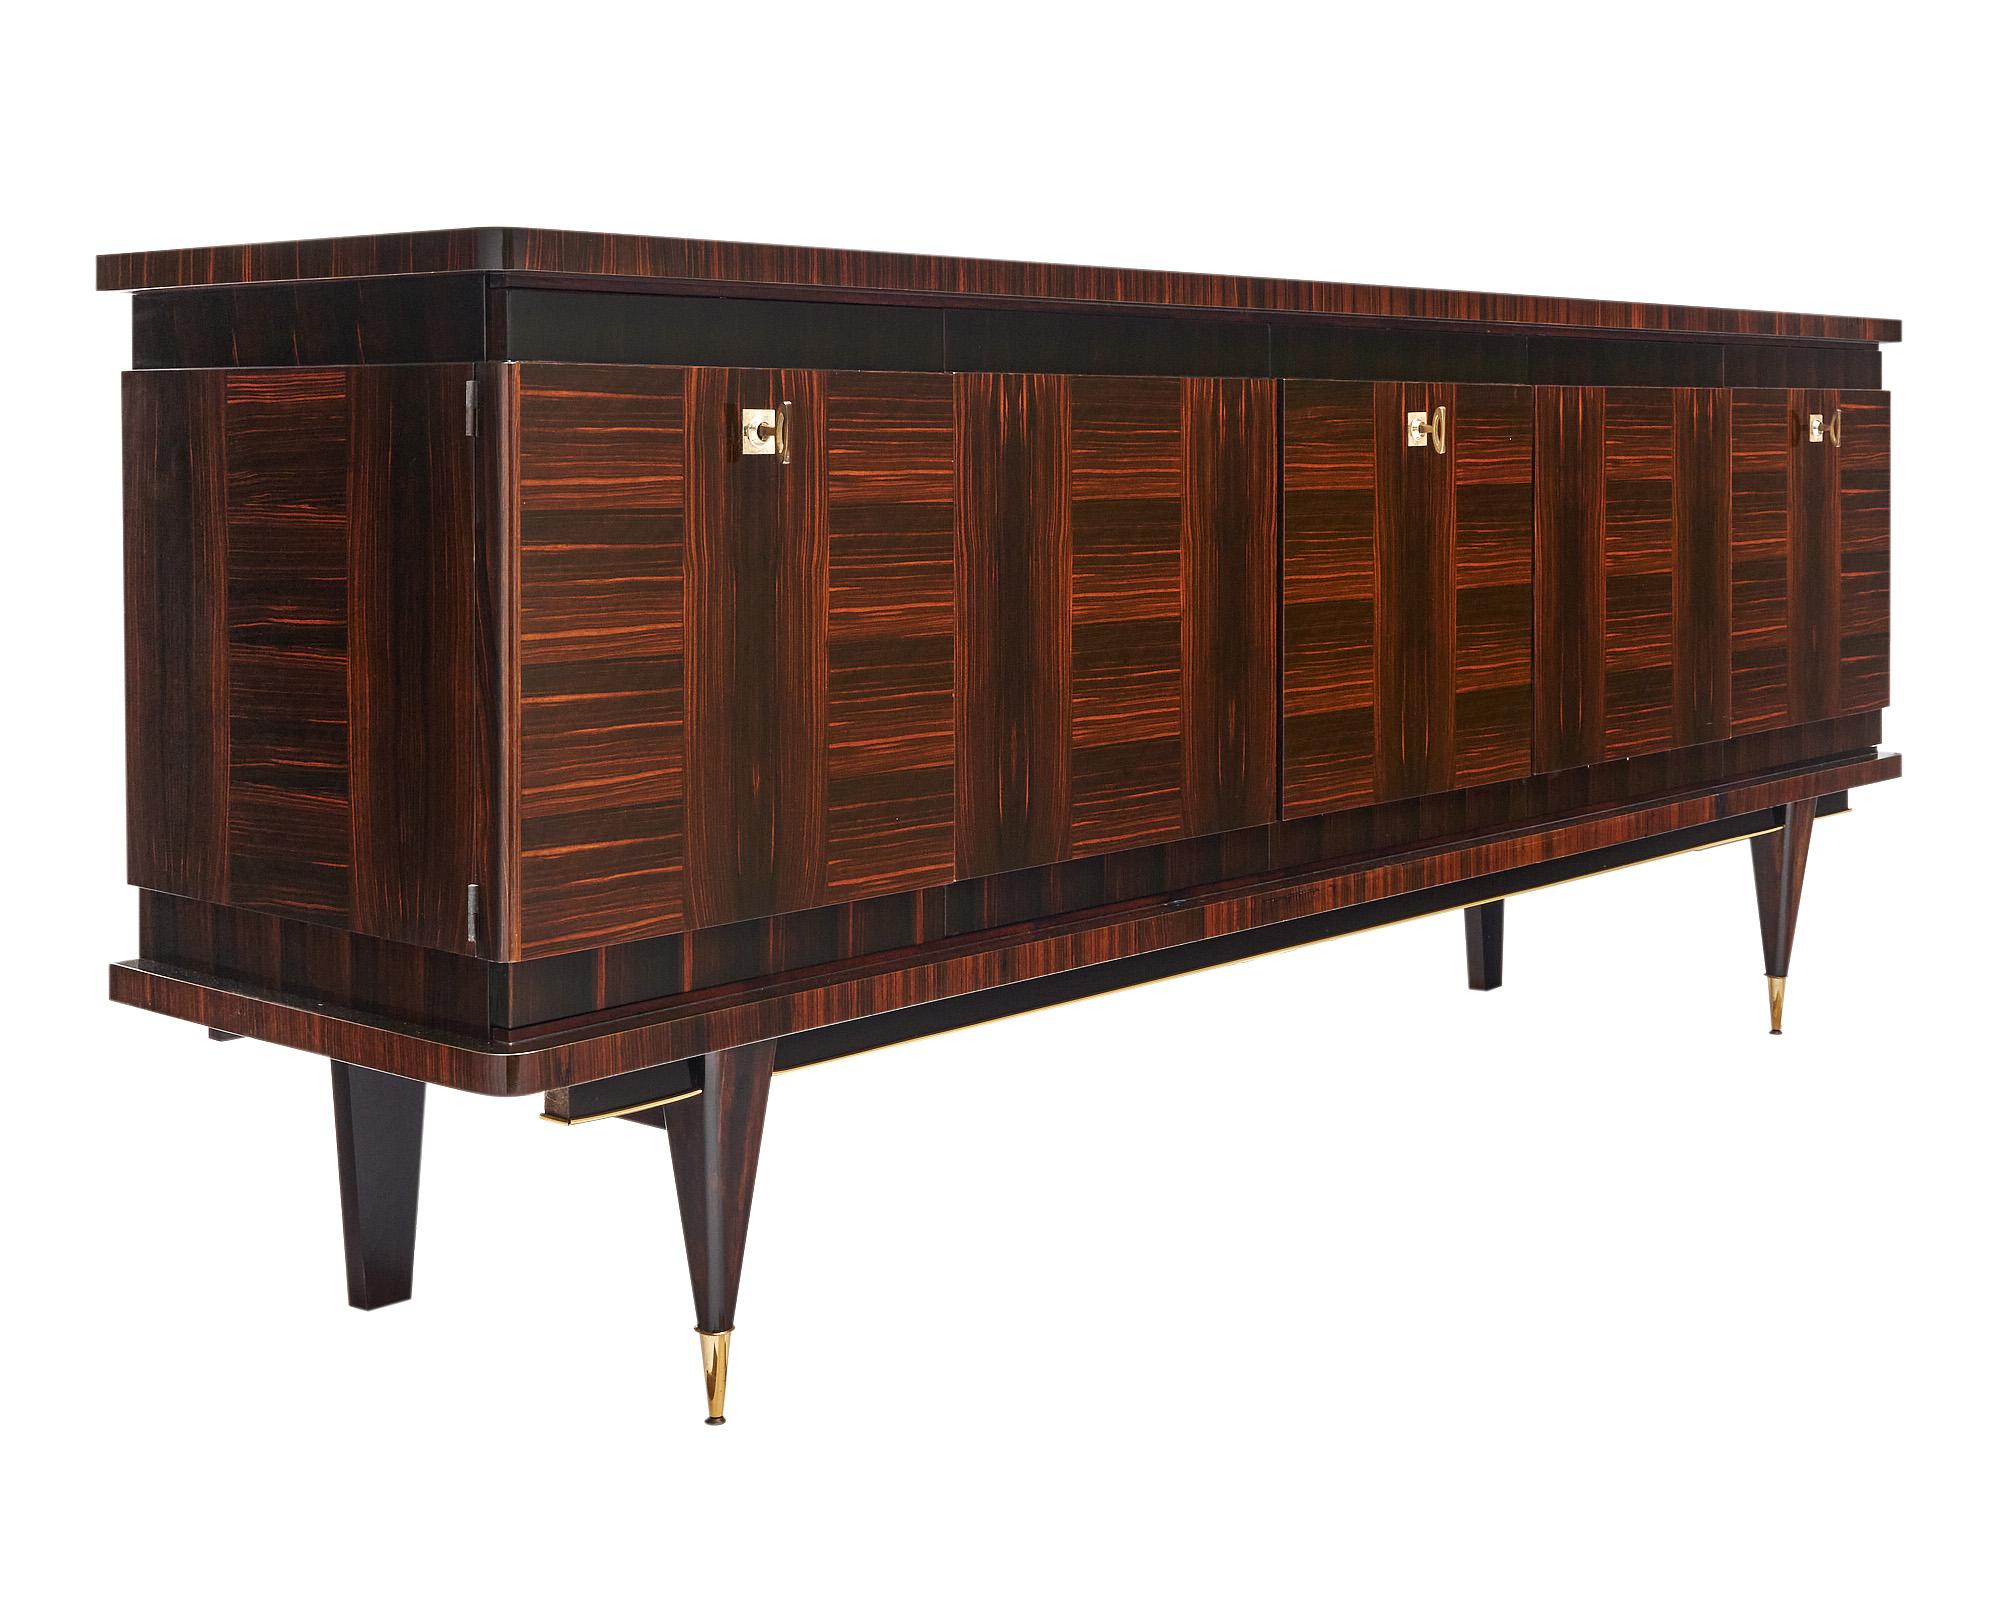 Grand buffet from France featuring a striking Macassar facade and in the manner of Jules Leleu. The doors feature the original working hardware and locks. The center has a door that opens to reveal a bar space with room for bottles and an original